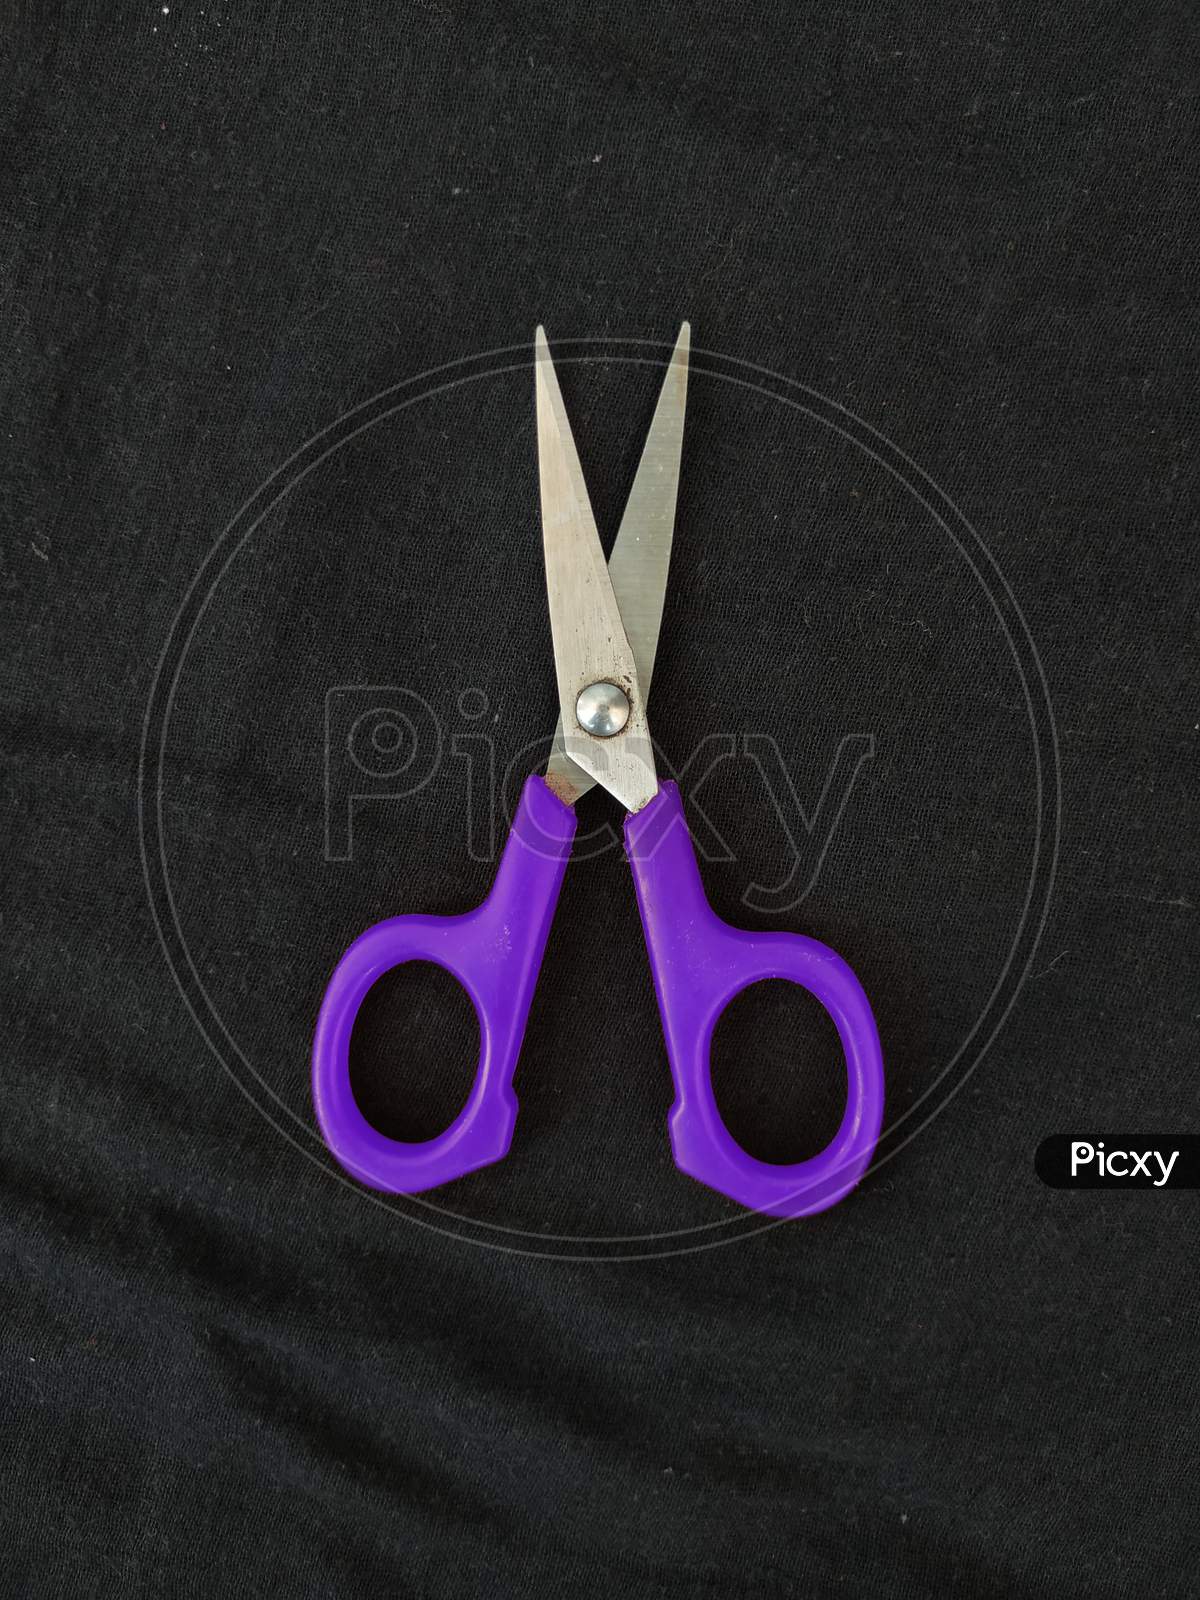 Steel And Purple Color Small Single Scissor Isolated On Black Background